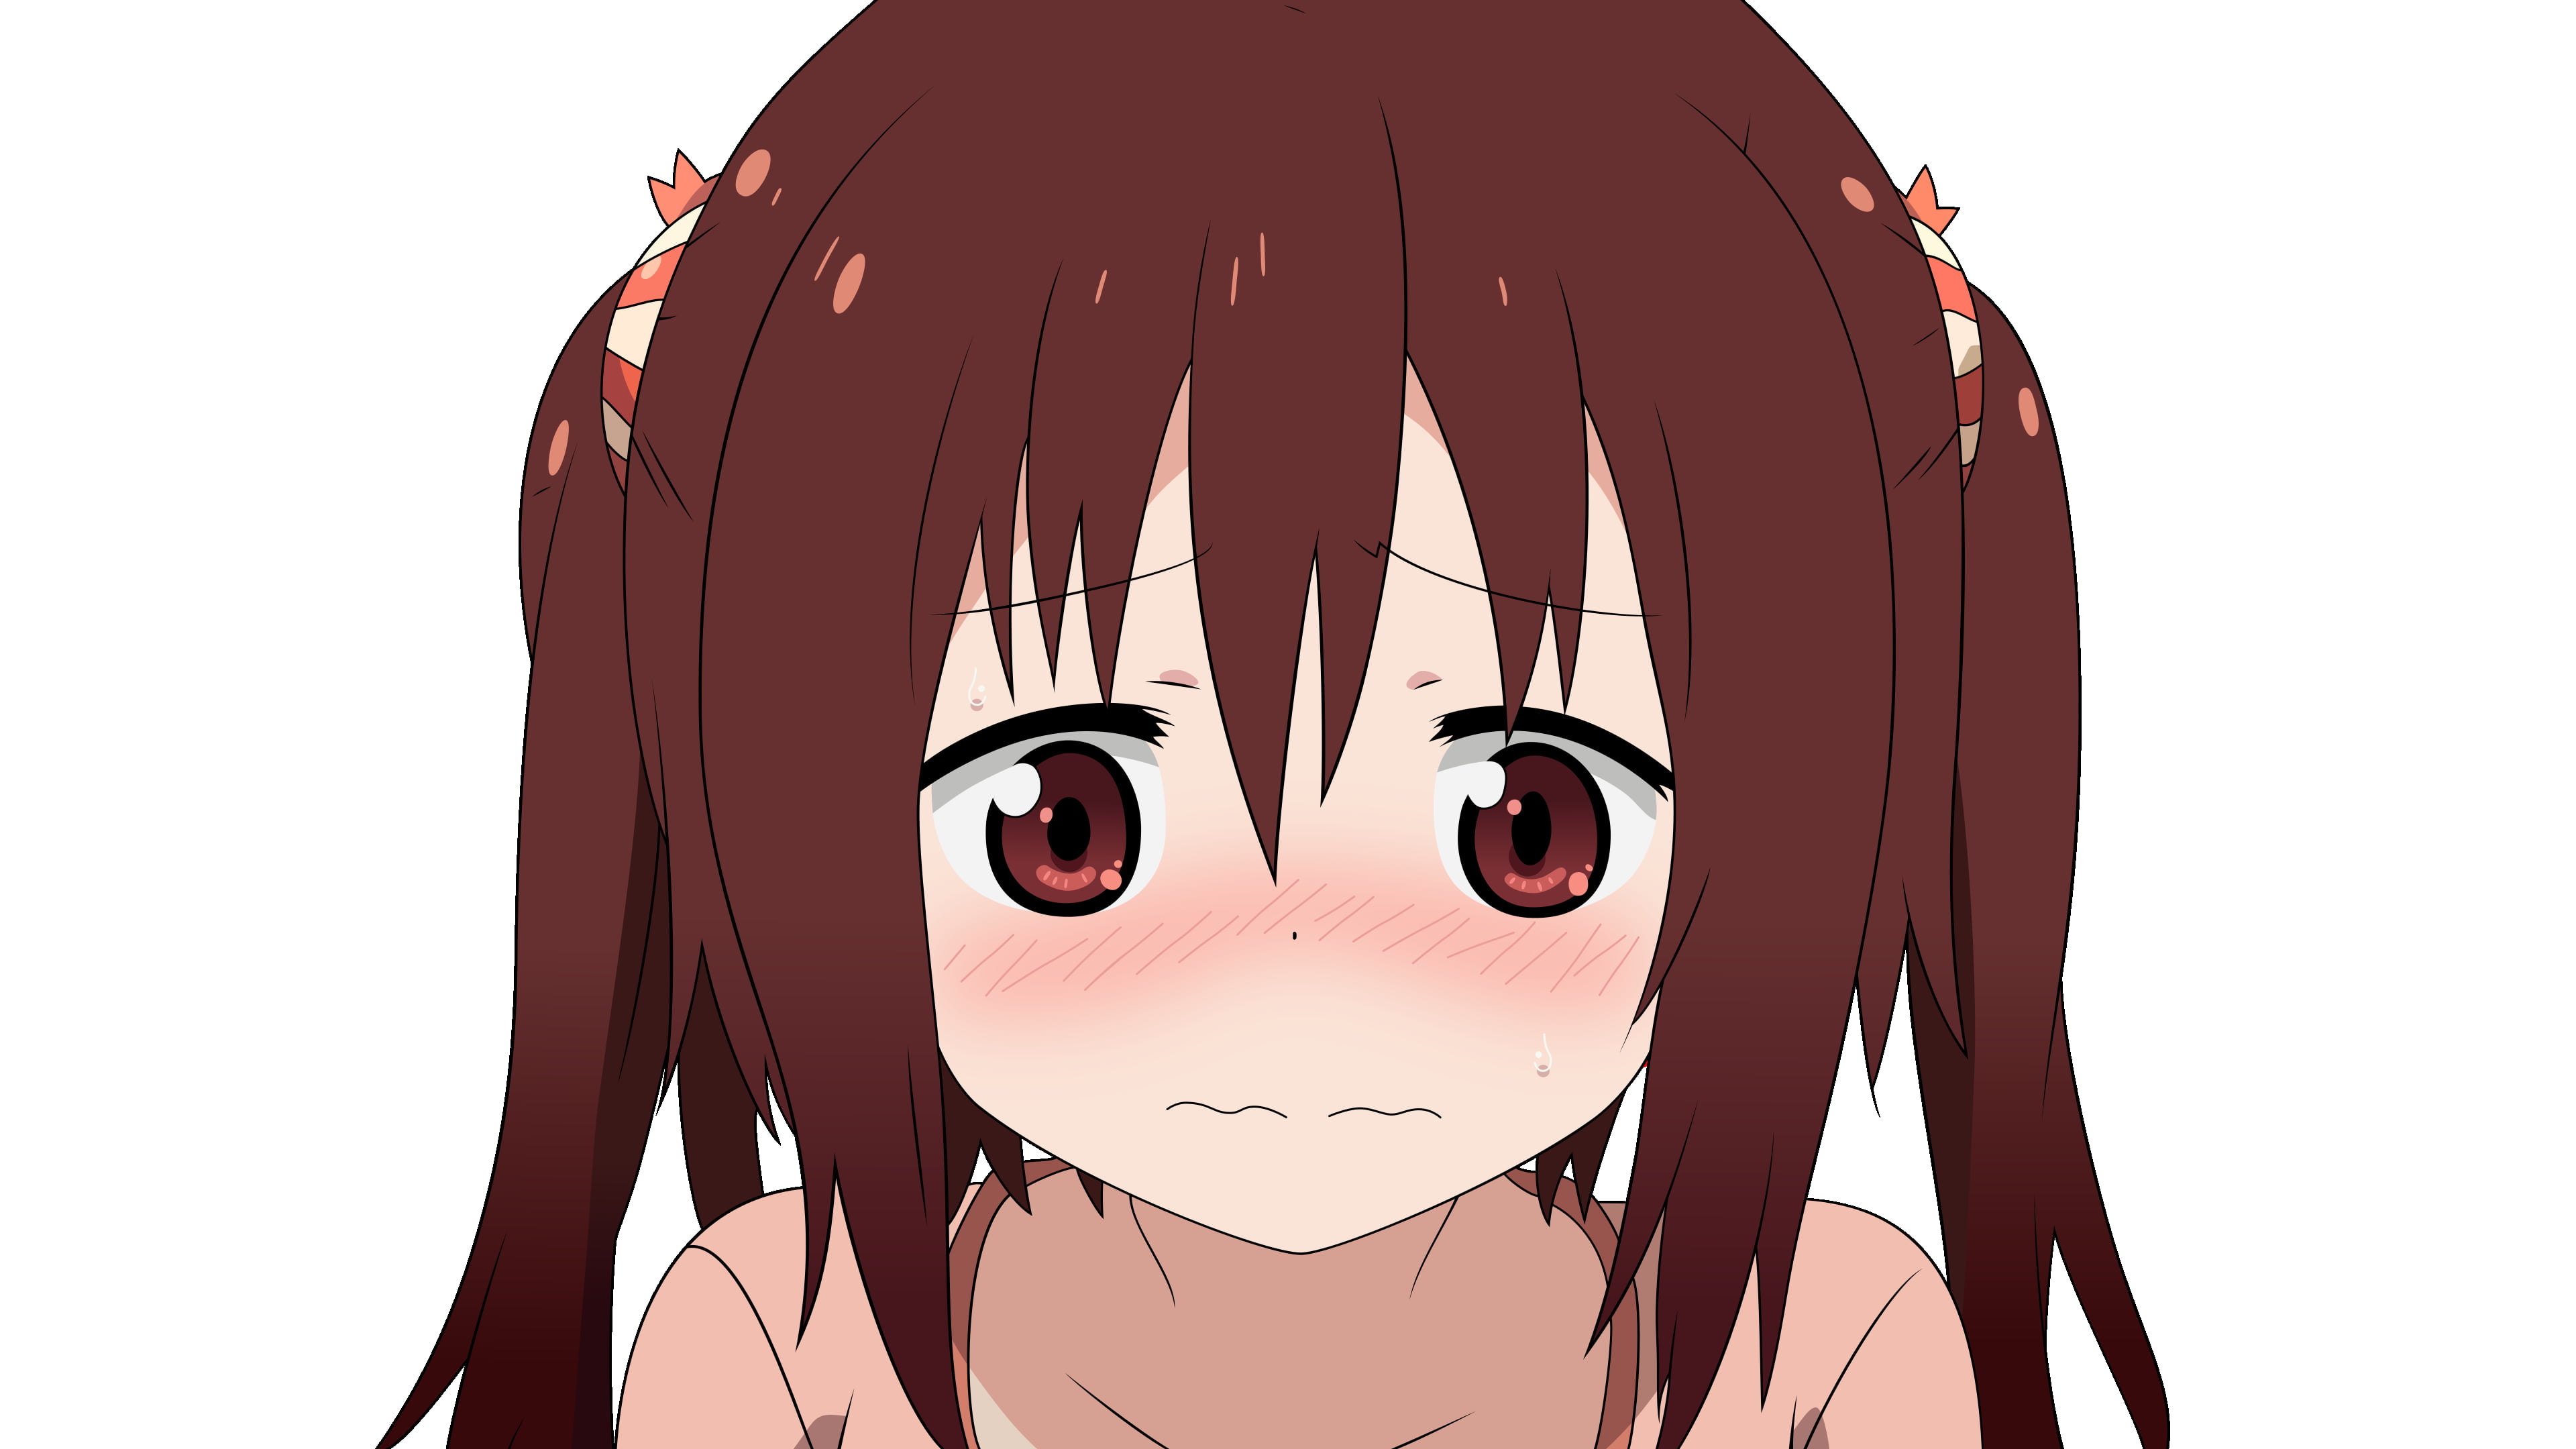 animated brown haired girl looking down with sad facial expression illustration